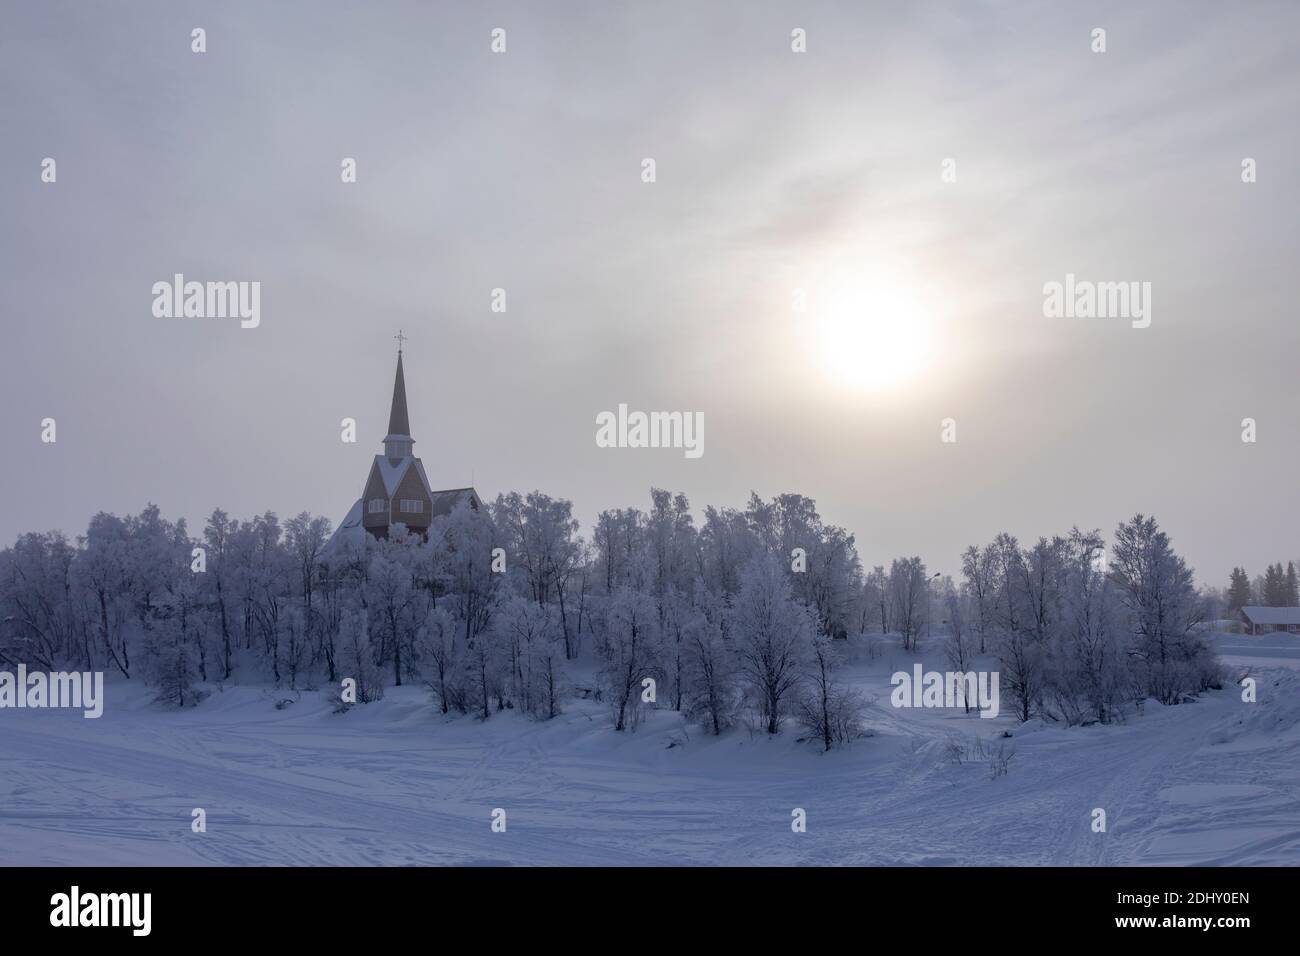 Lapland, Finland: scenic view of a church in a snowy forest near the border between Finland and Sweden Stock Photo